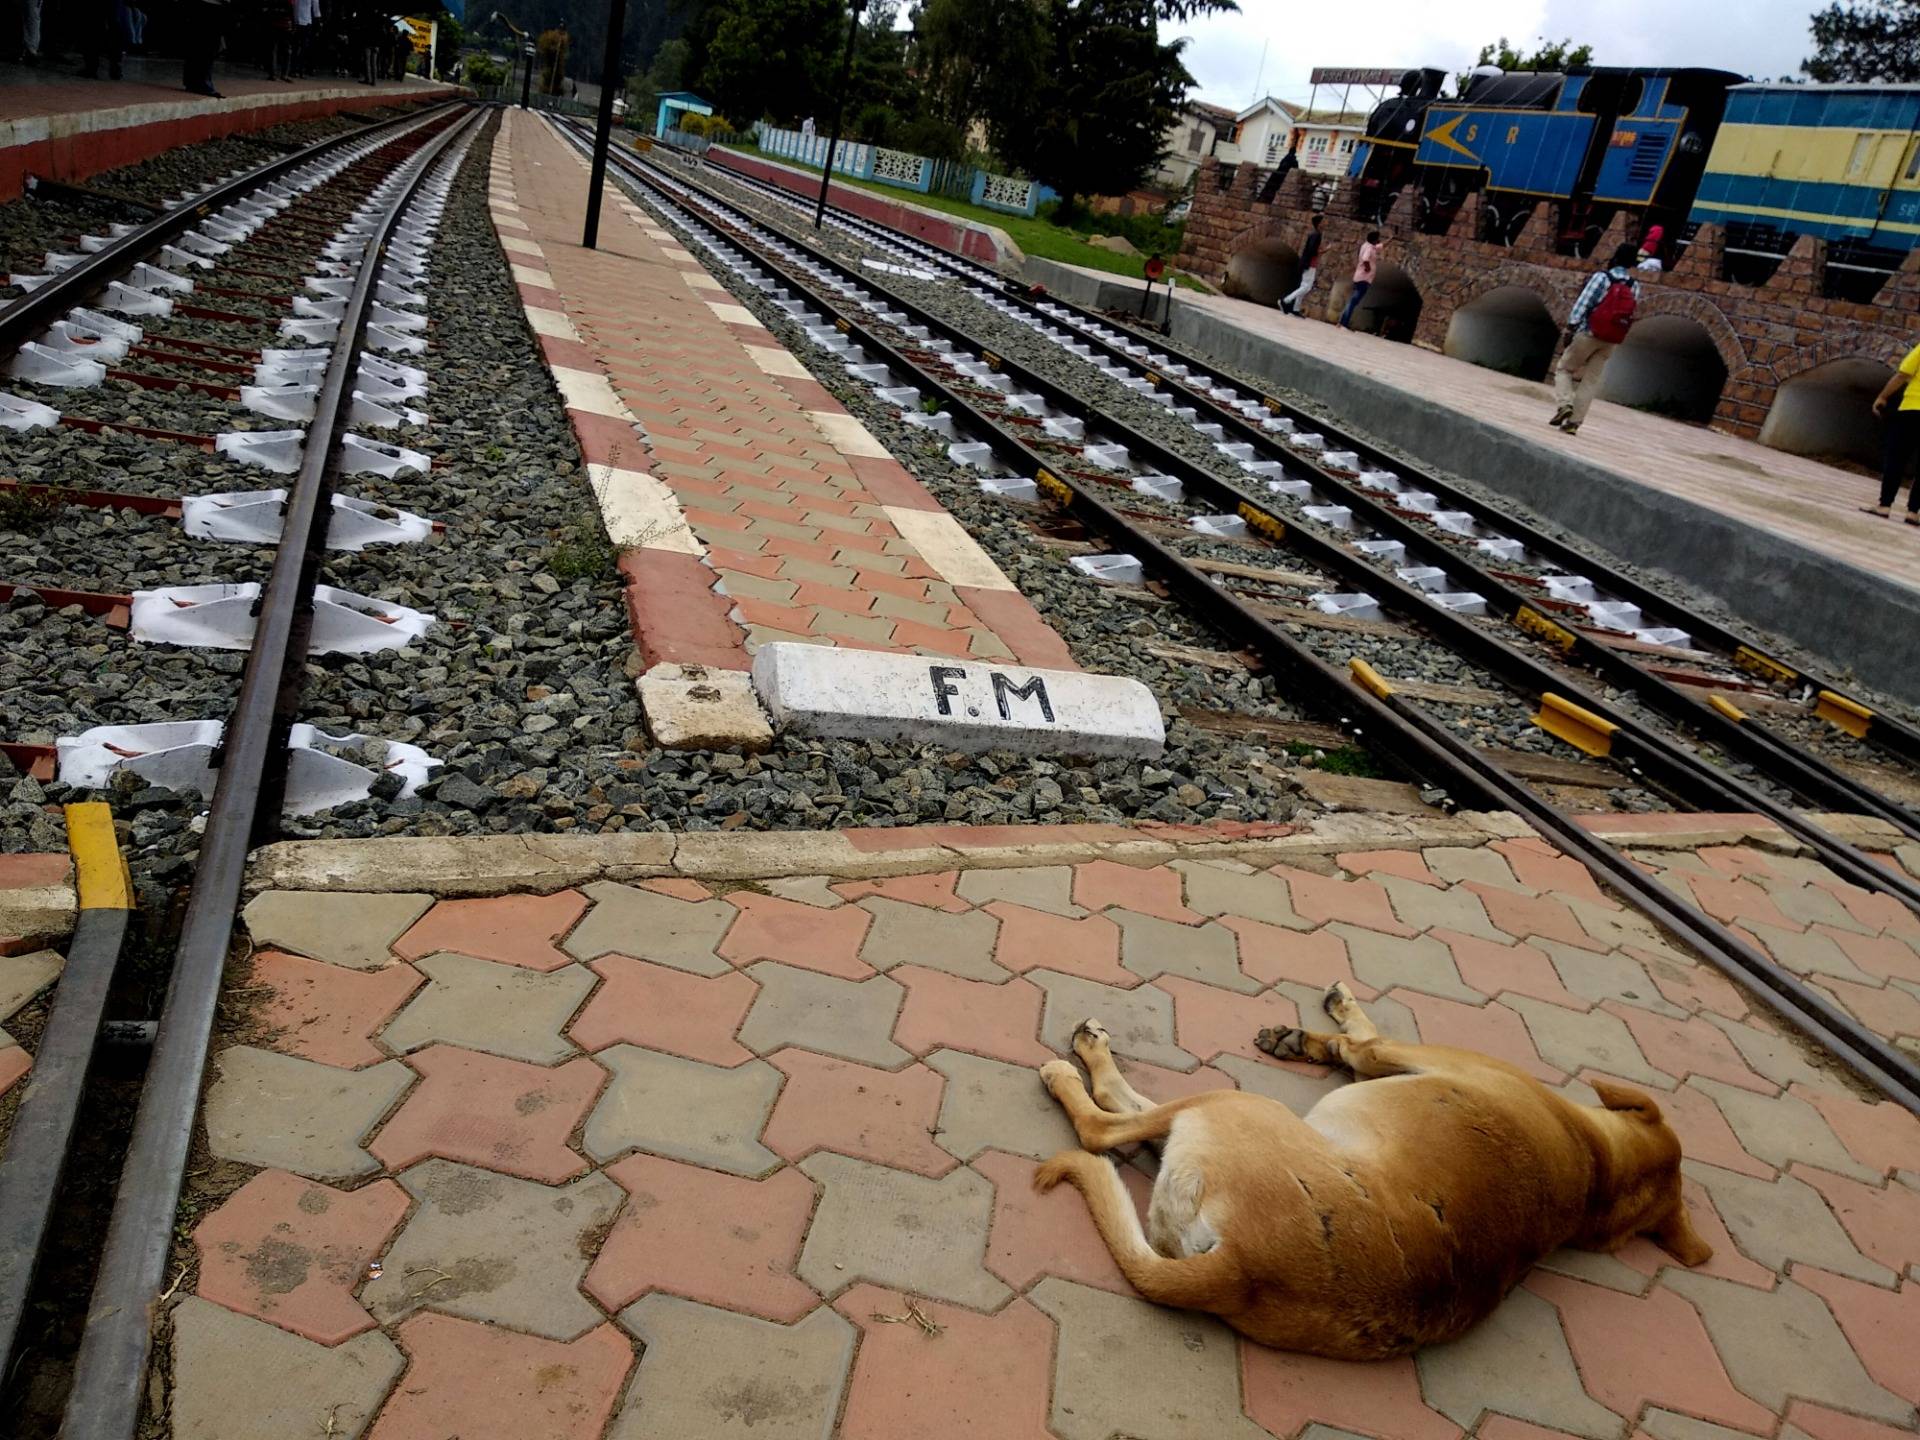 Just look at him or her, right in the middle of the tracks, with no care to what so ever happening around!